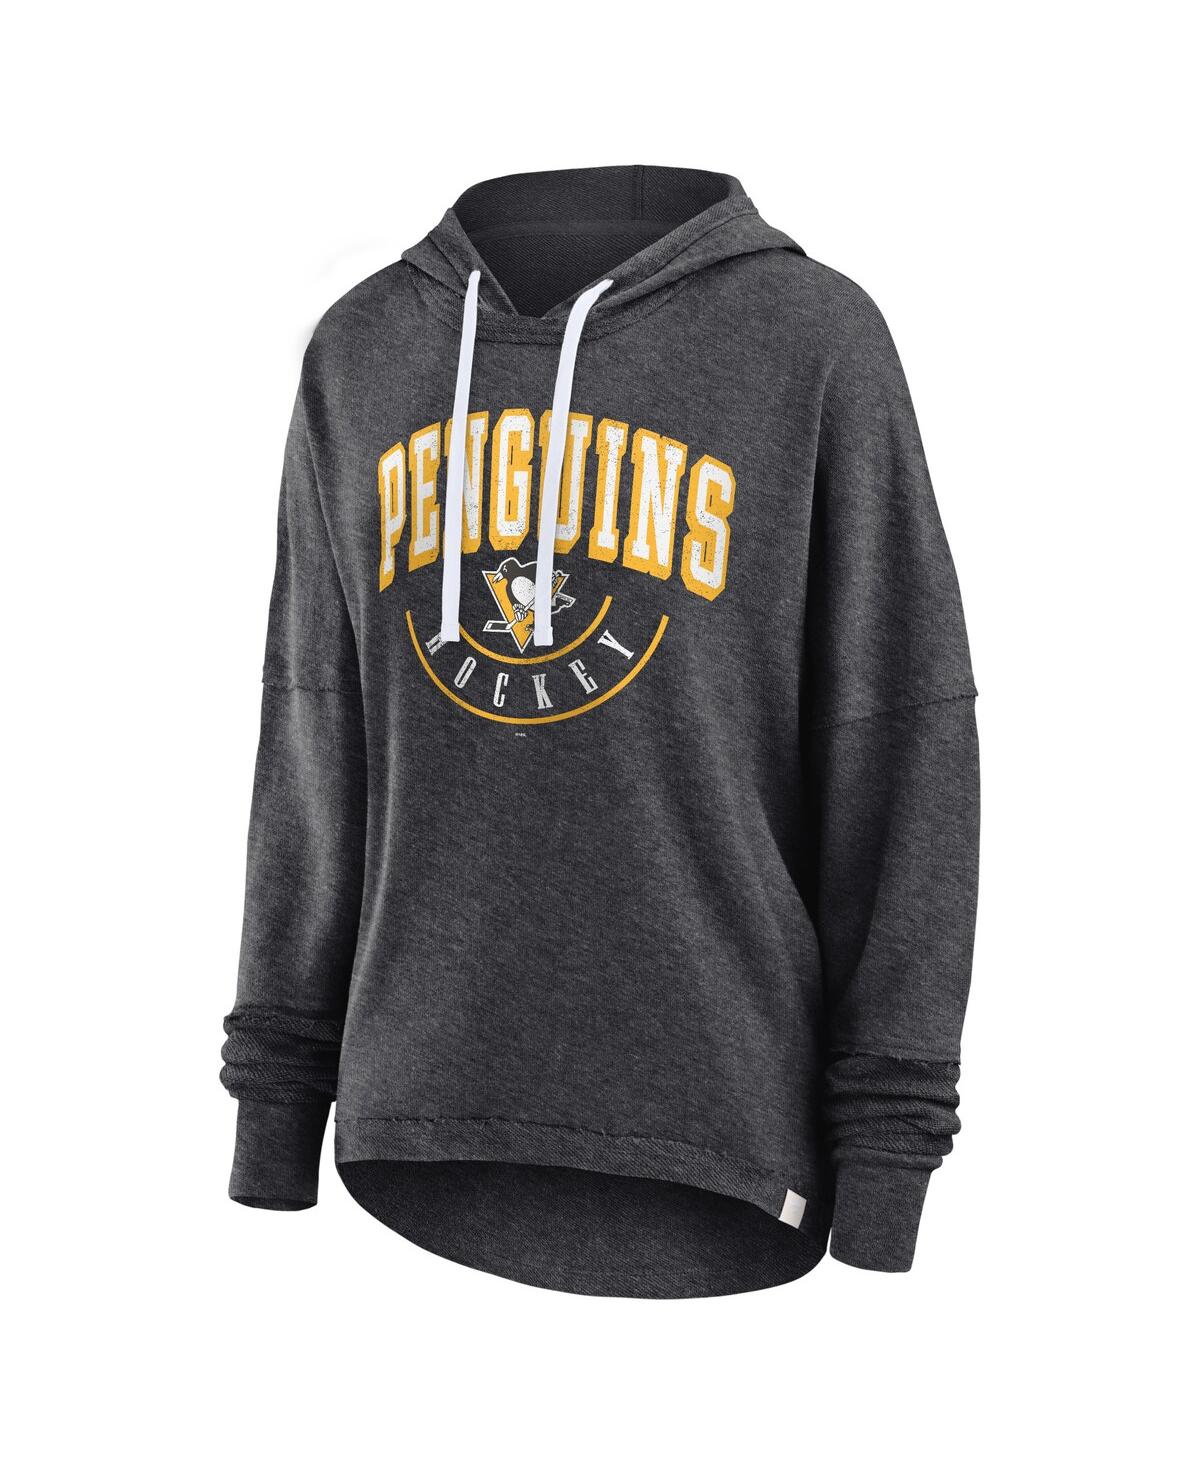 Shop Fanatics Women's  Heather Charcoal Distressed Pittsburgh Penguins Lux Lounge Helmet Arch Pullover Hoo